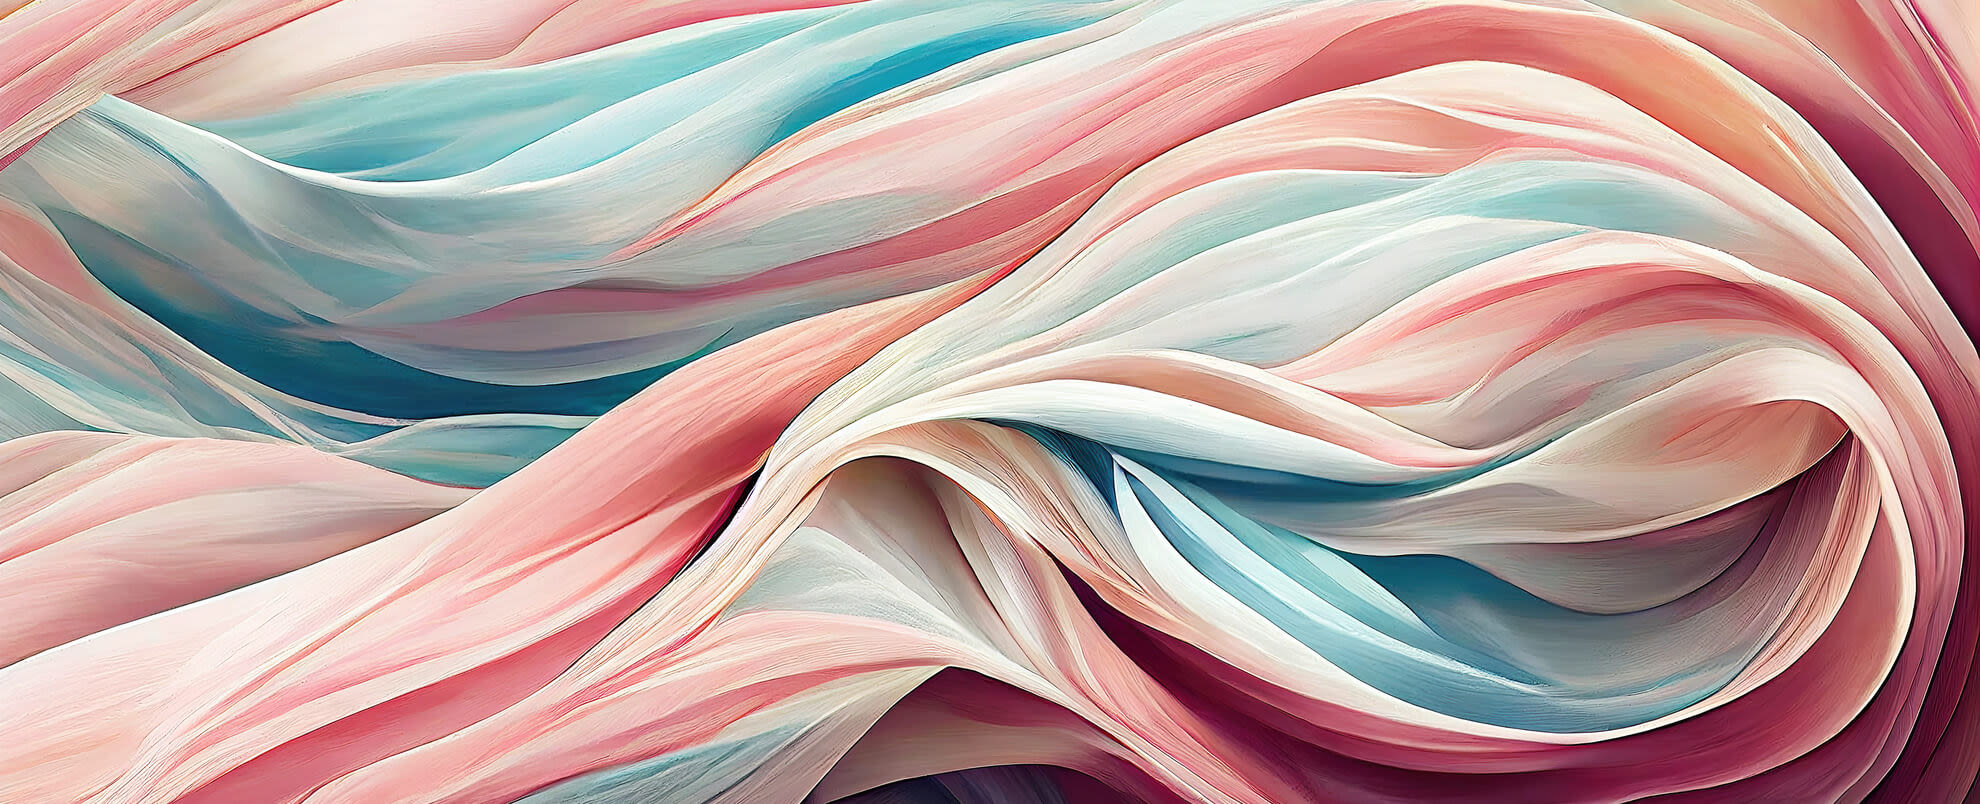 Flowing material